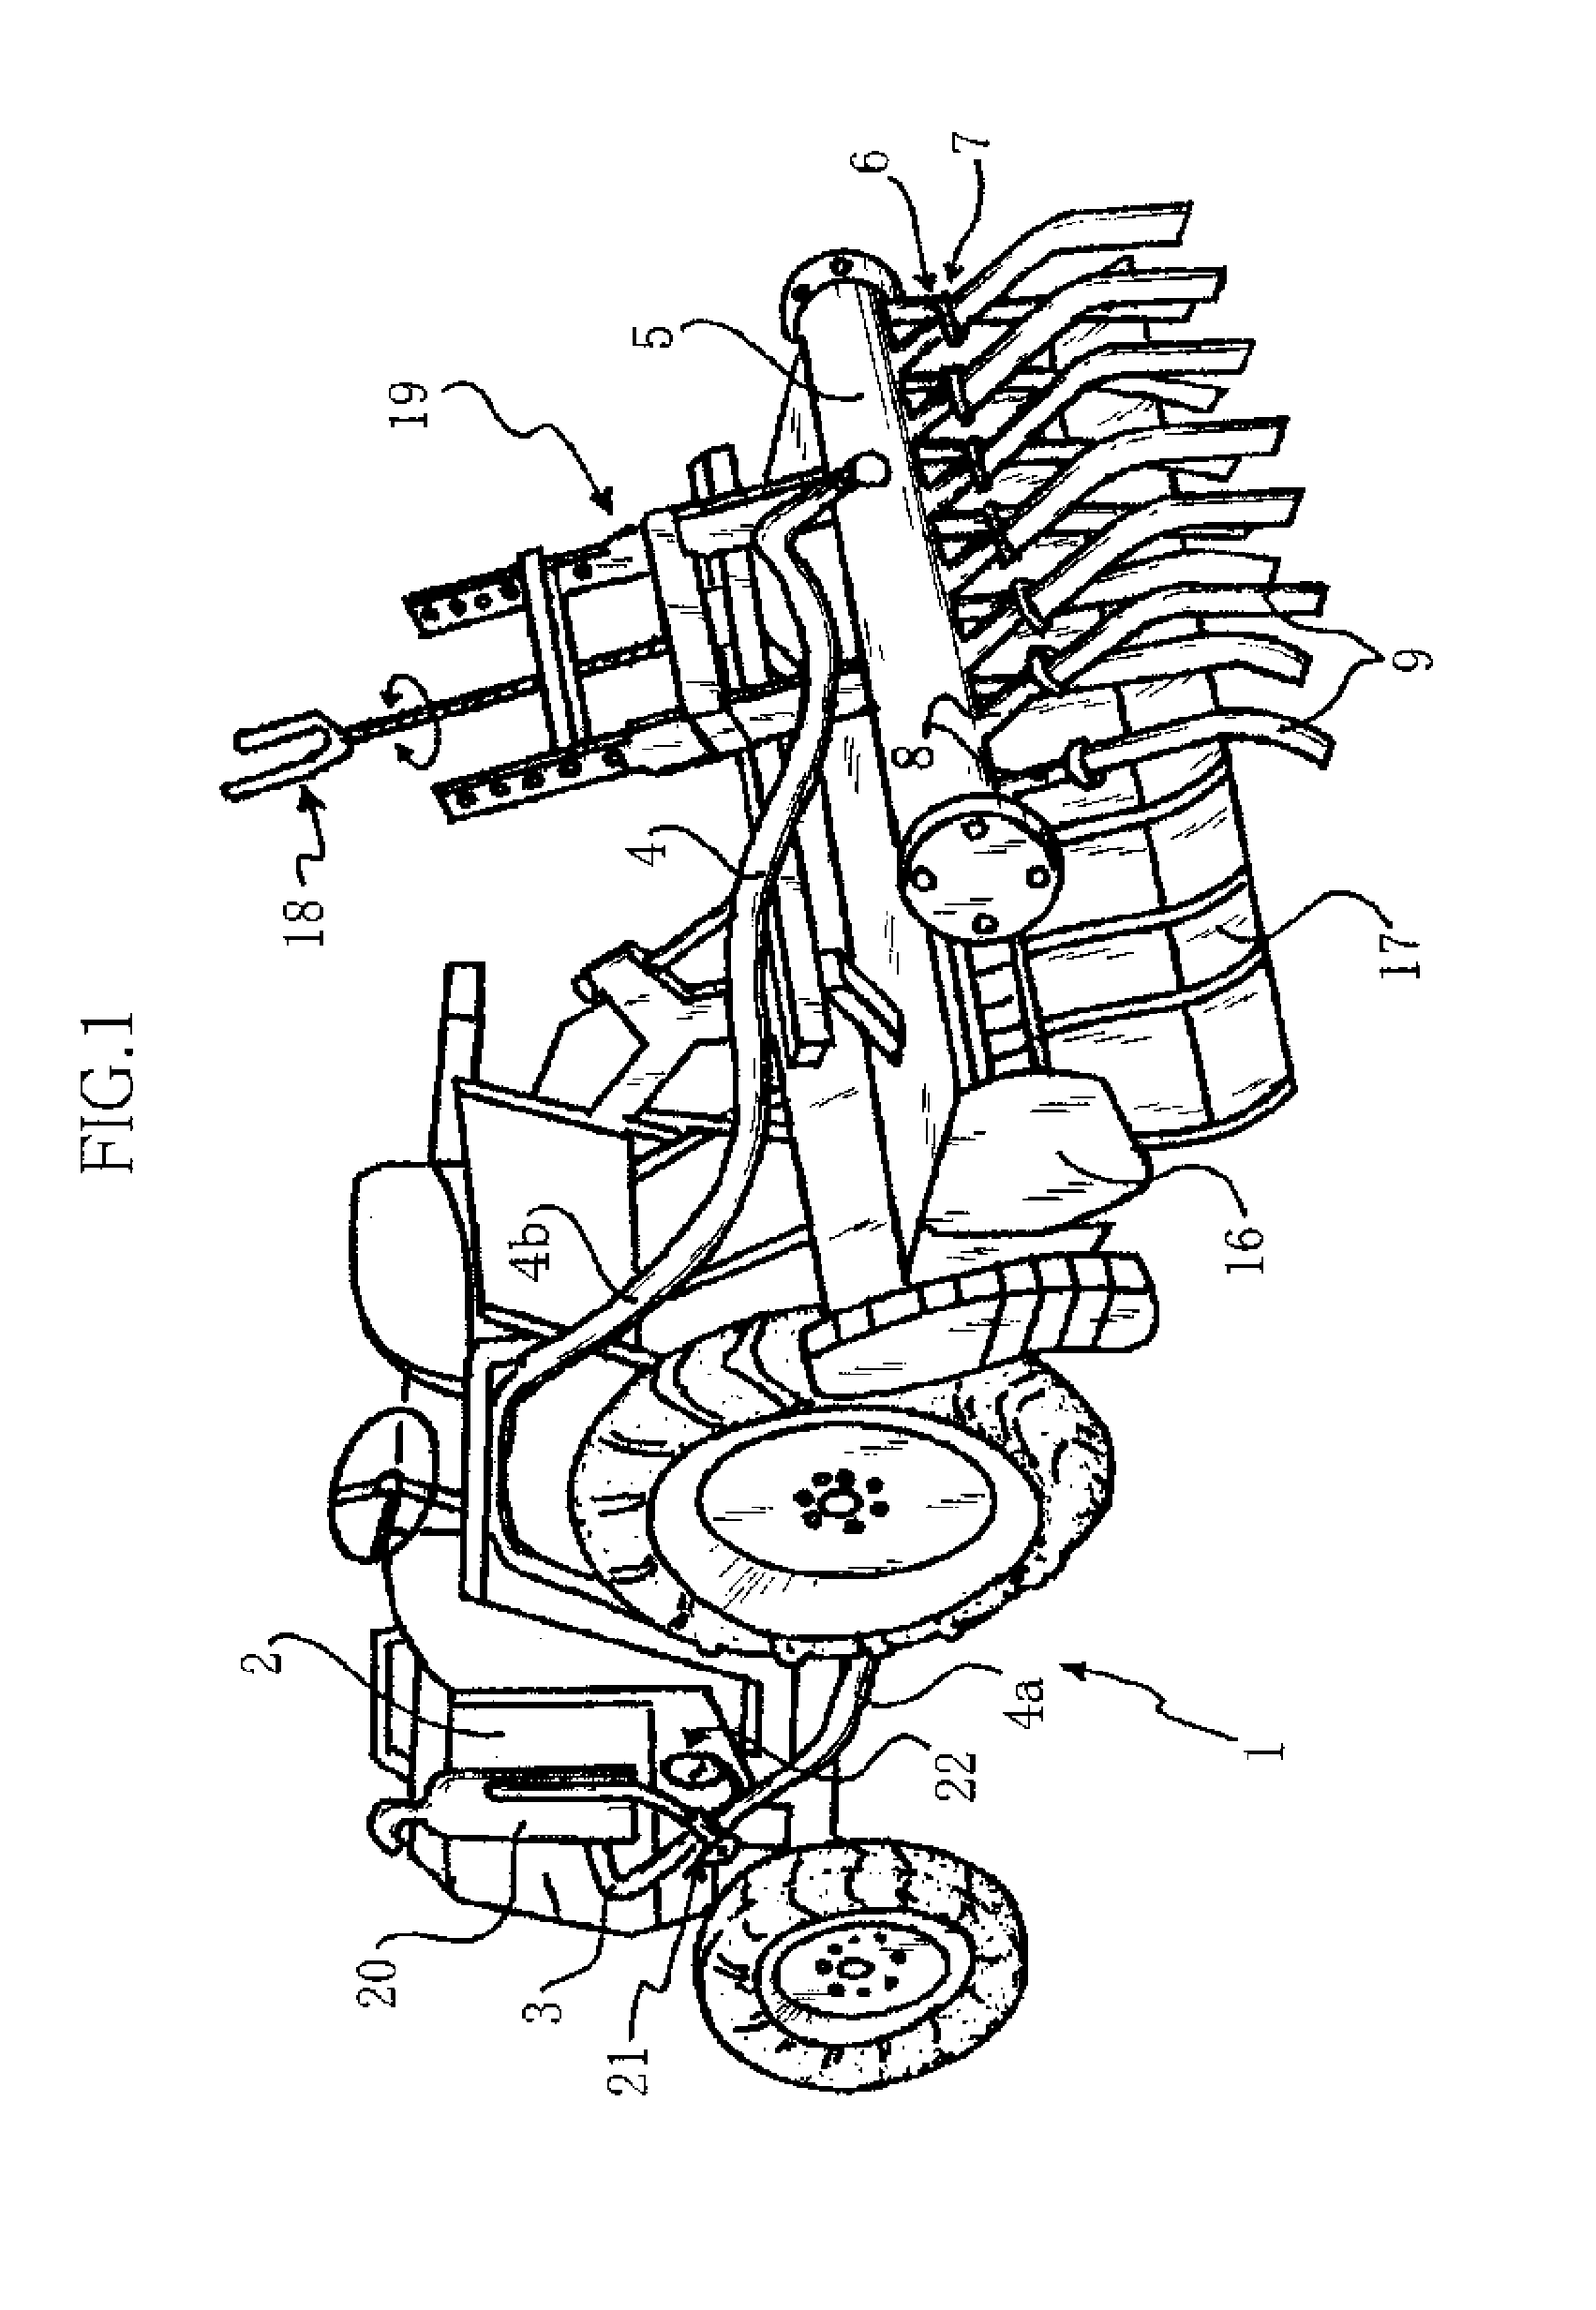 Soil pasteurizing apparatus and method using exhaust gas